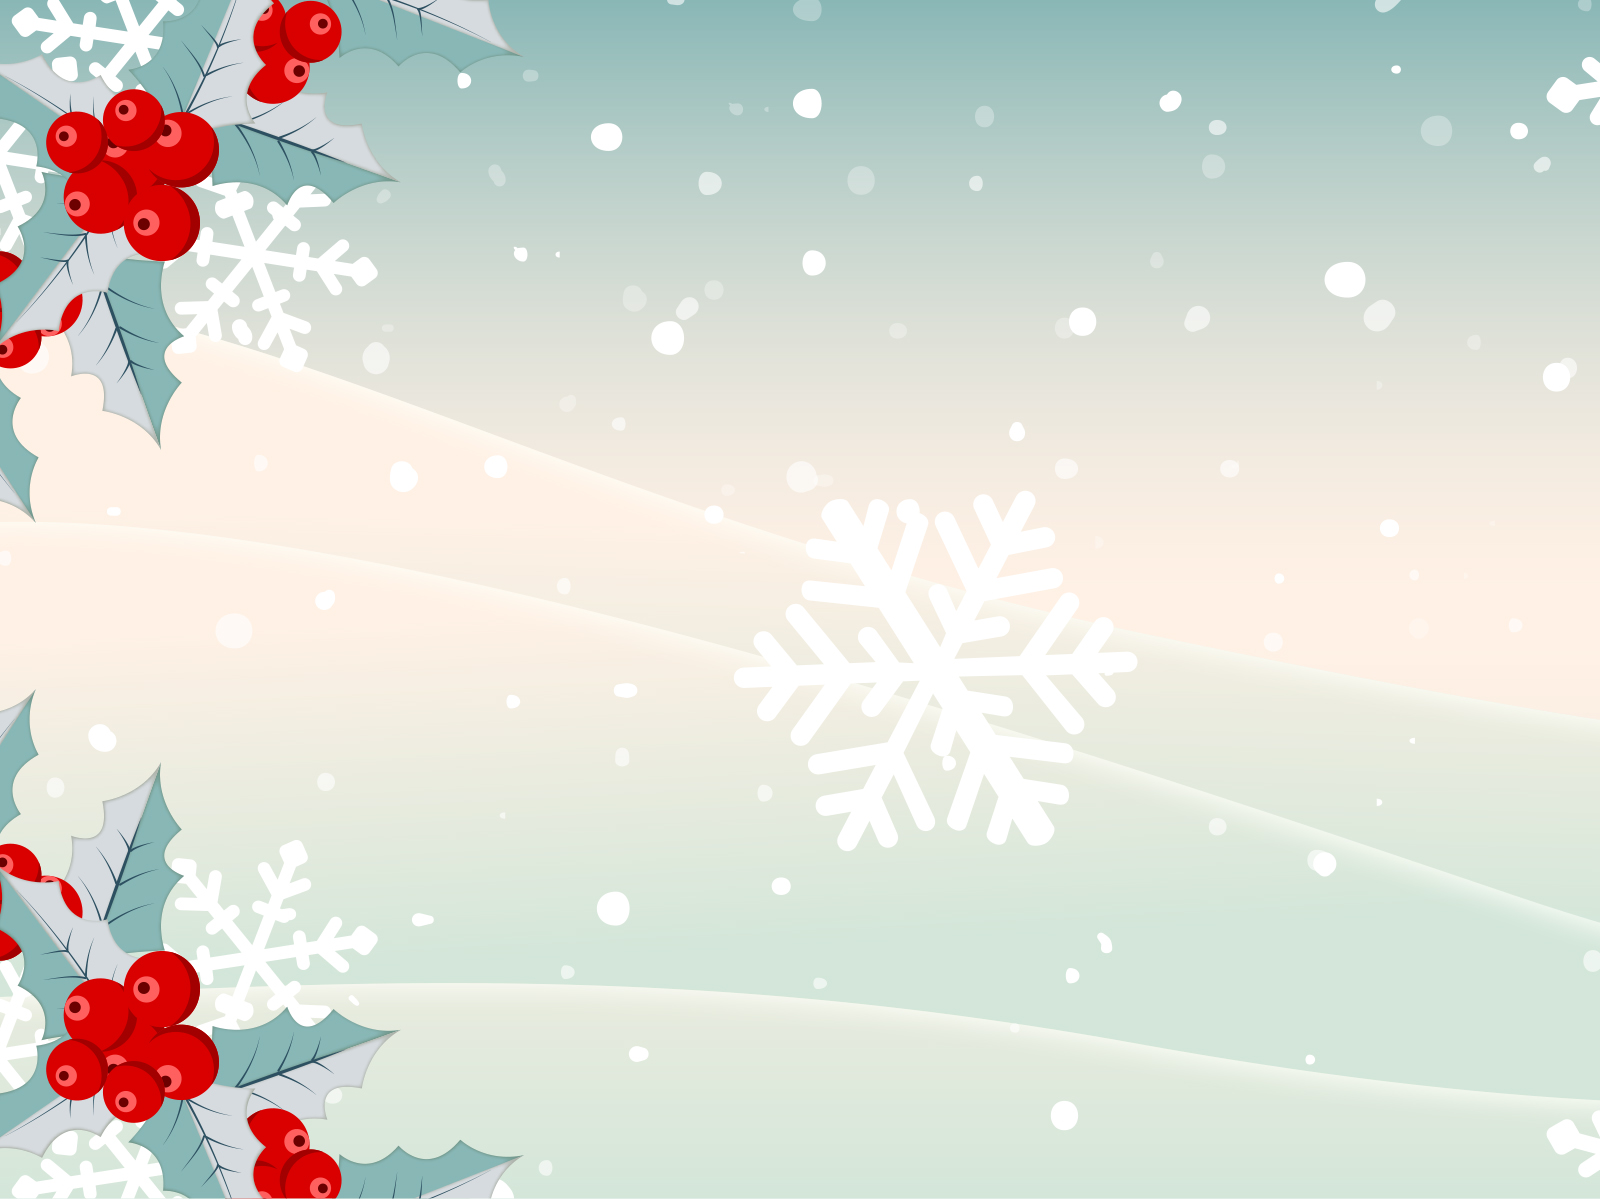 Free Download Christmas Powerpoint Templates Free Ppt Backgrounds And Xmas Snows 1600x1200 For